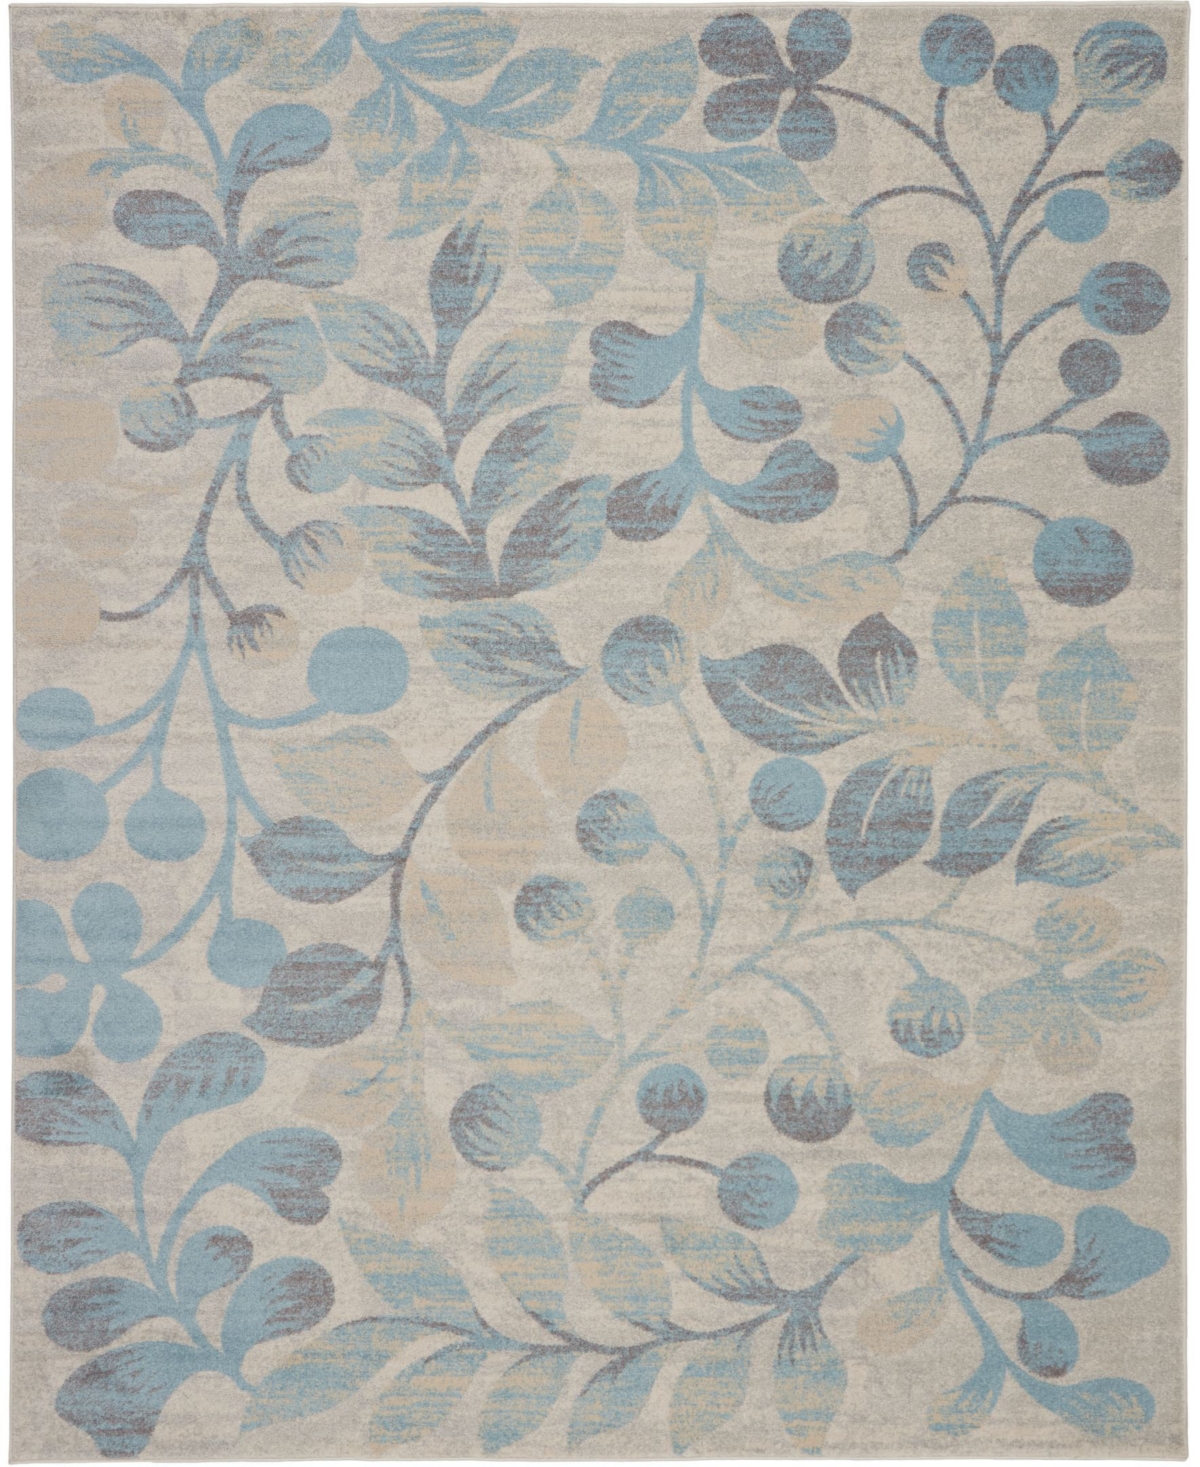 Long Street Looms Peace Pea03 Ivory 8'10" X 11'10" Area Rug In Ivory,turquoise